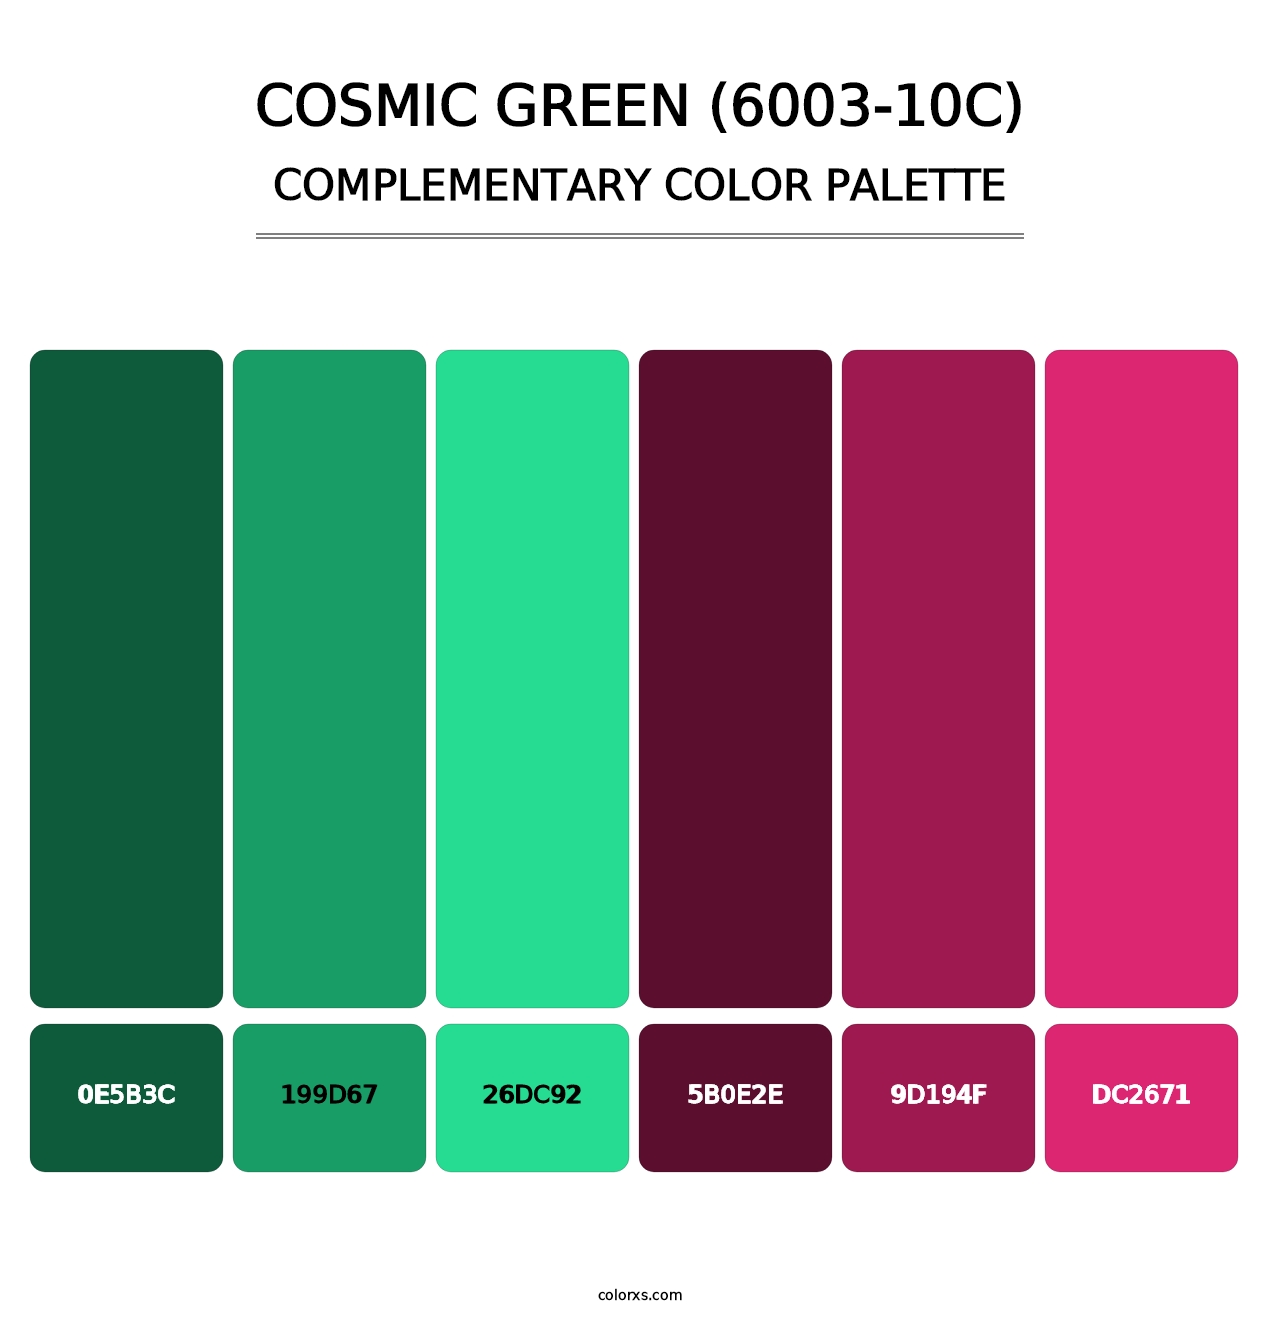 Cosmic Green (6003-10C) - Complementary Color Palette